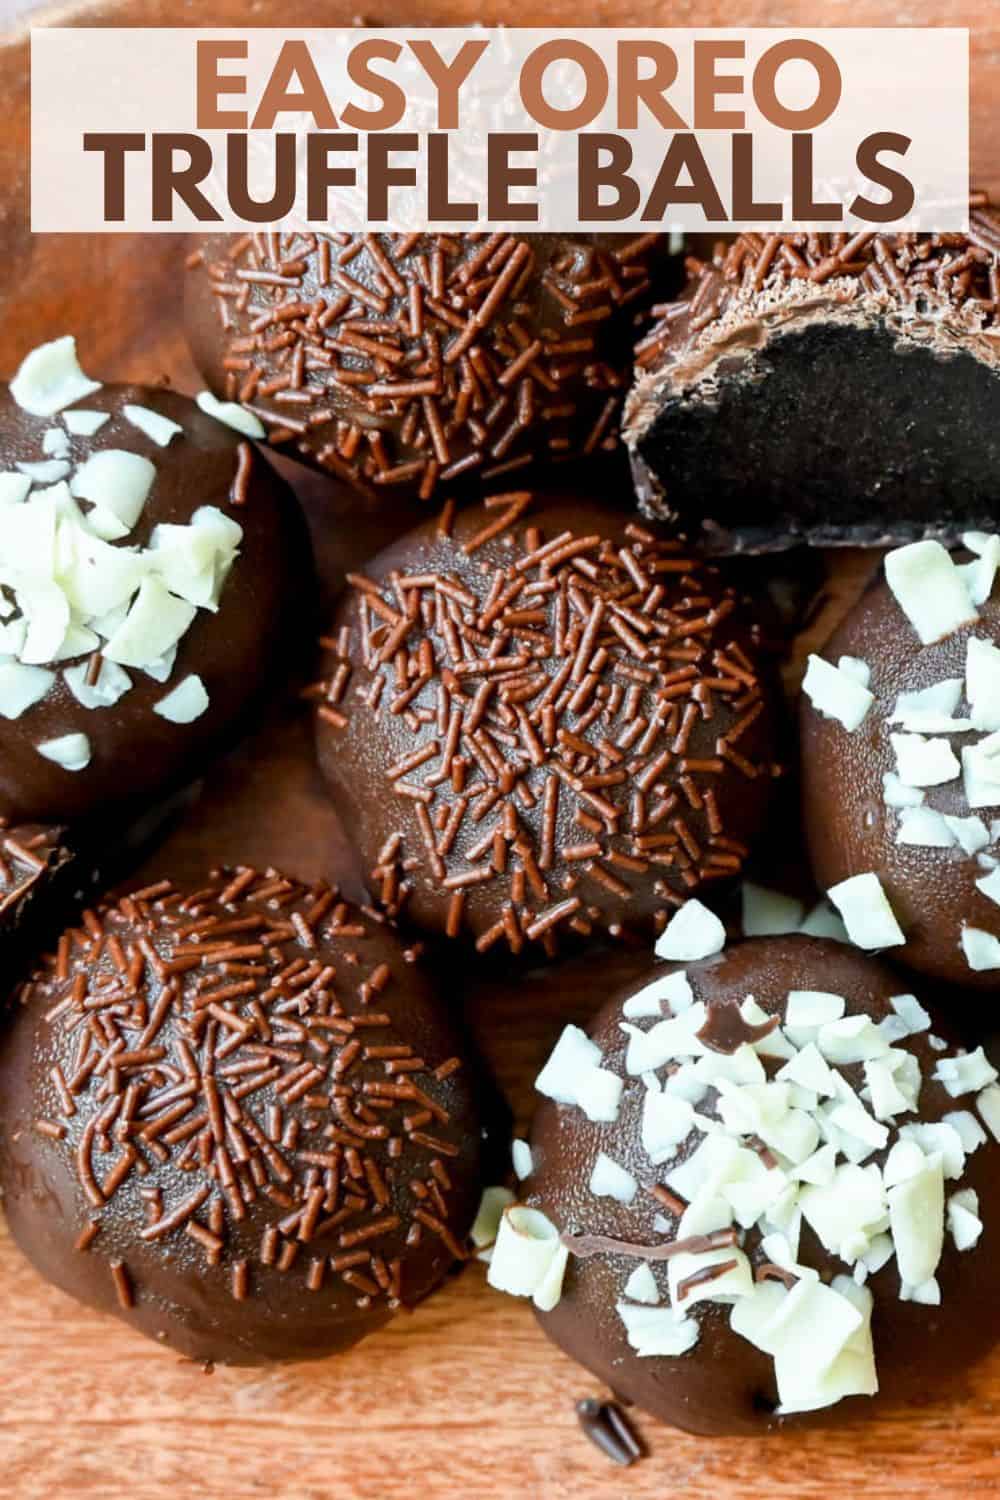 Oreo Balls. Rich and creamy Oreo cake pops with a smooth chocolate coating. An easy homemade Oreo chocolate truffle with only 4 ingredients! The BEST Oreo balls recipe.